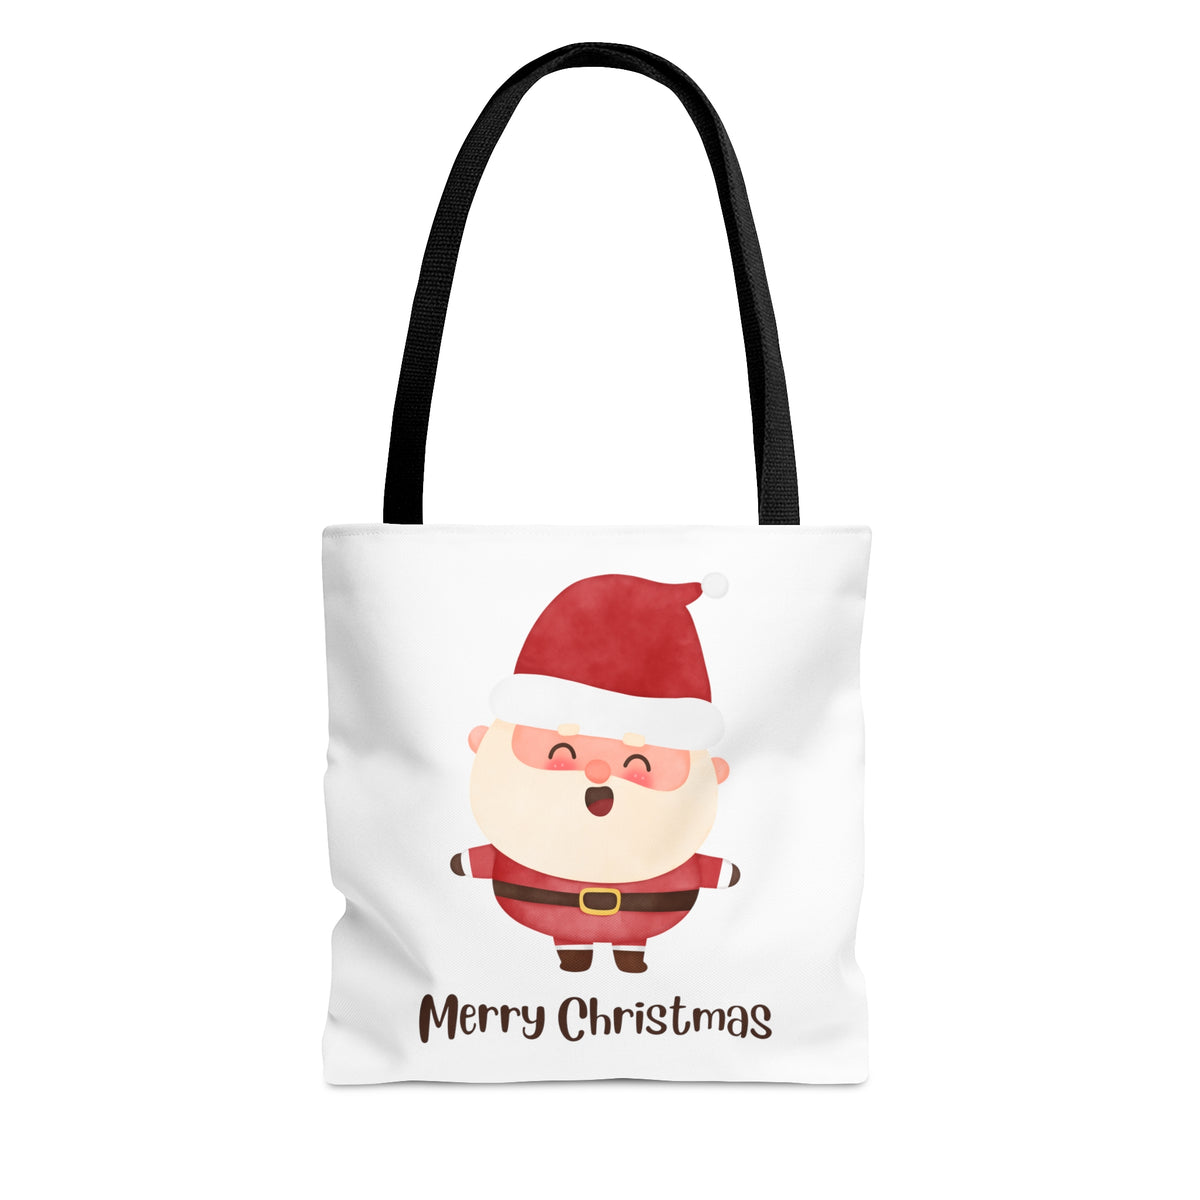 Merry Christmas Tote Bag, Reusable Canvas Santa Tote Bags, Available in Different Size